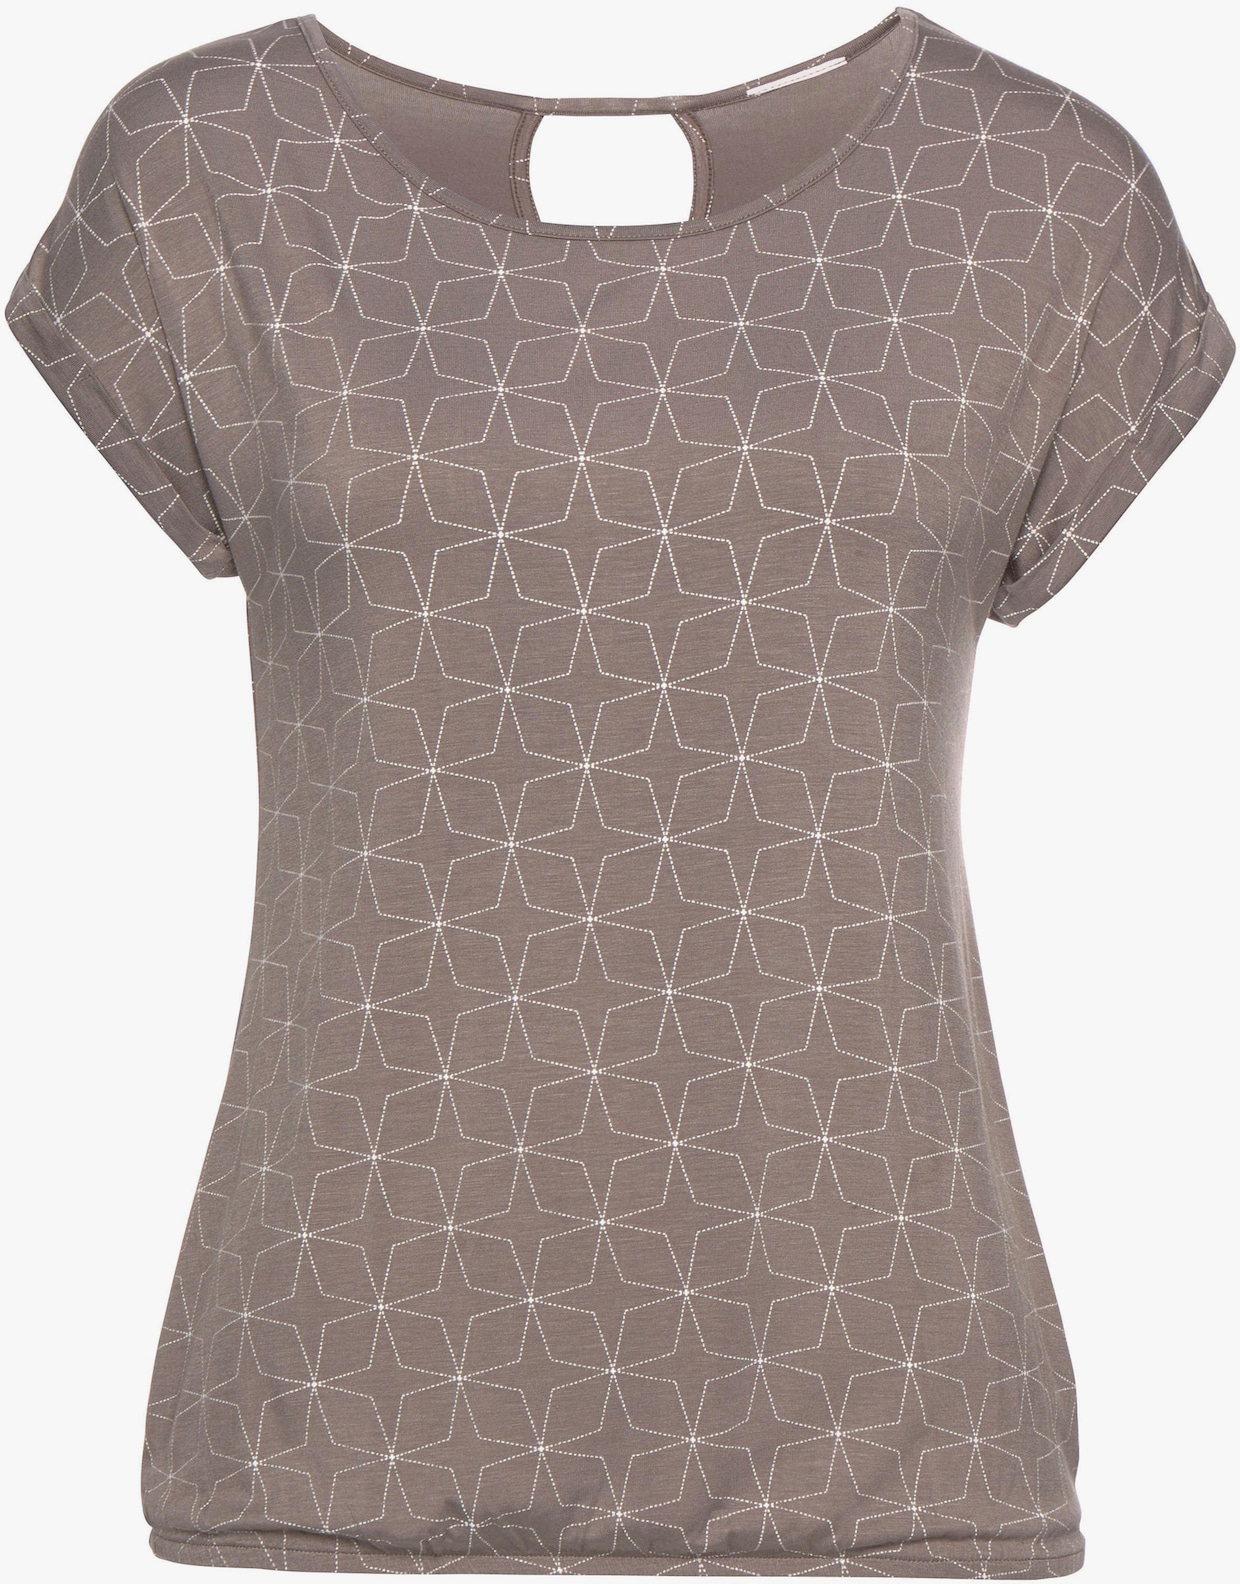 LASCANA T-Shirt - taupe, weiss